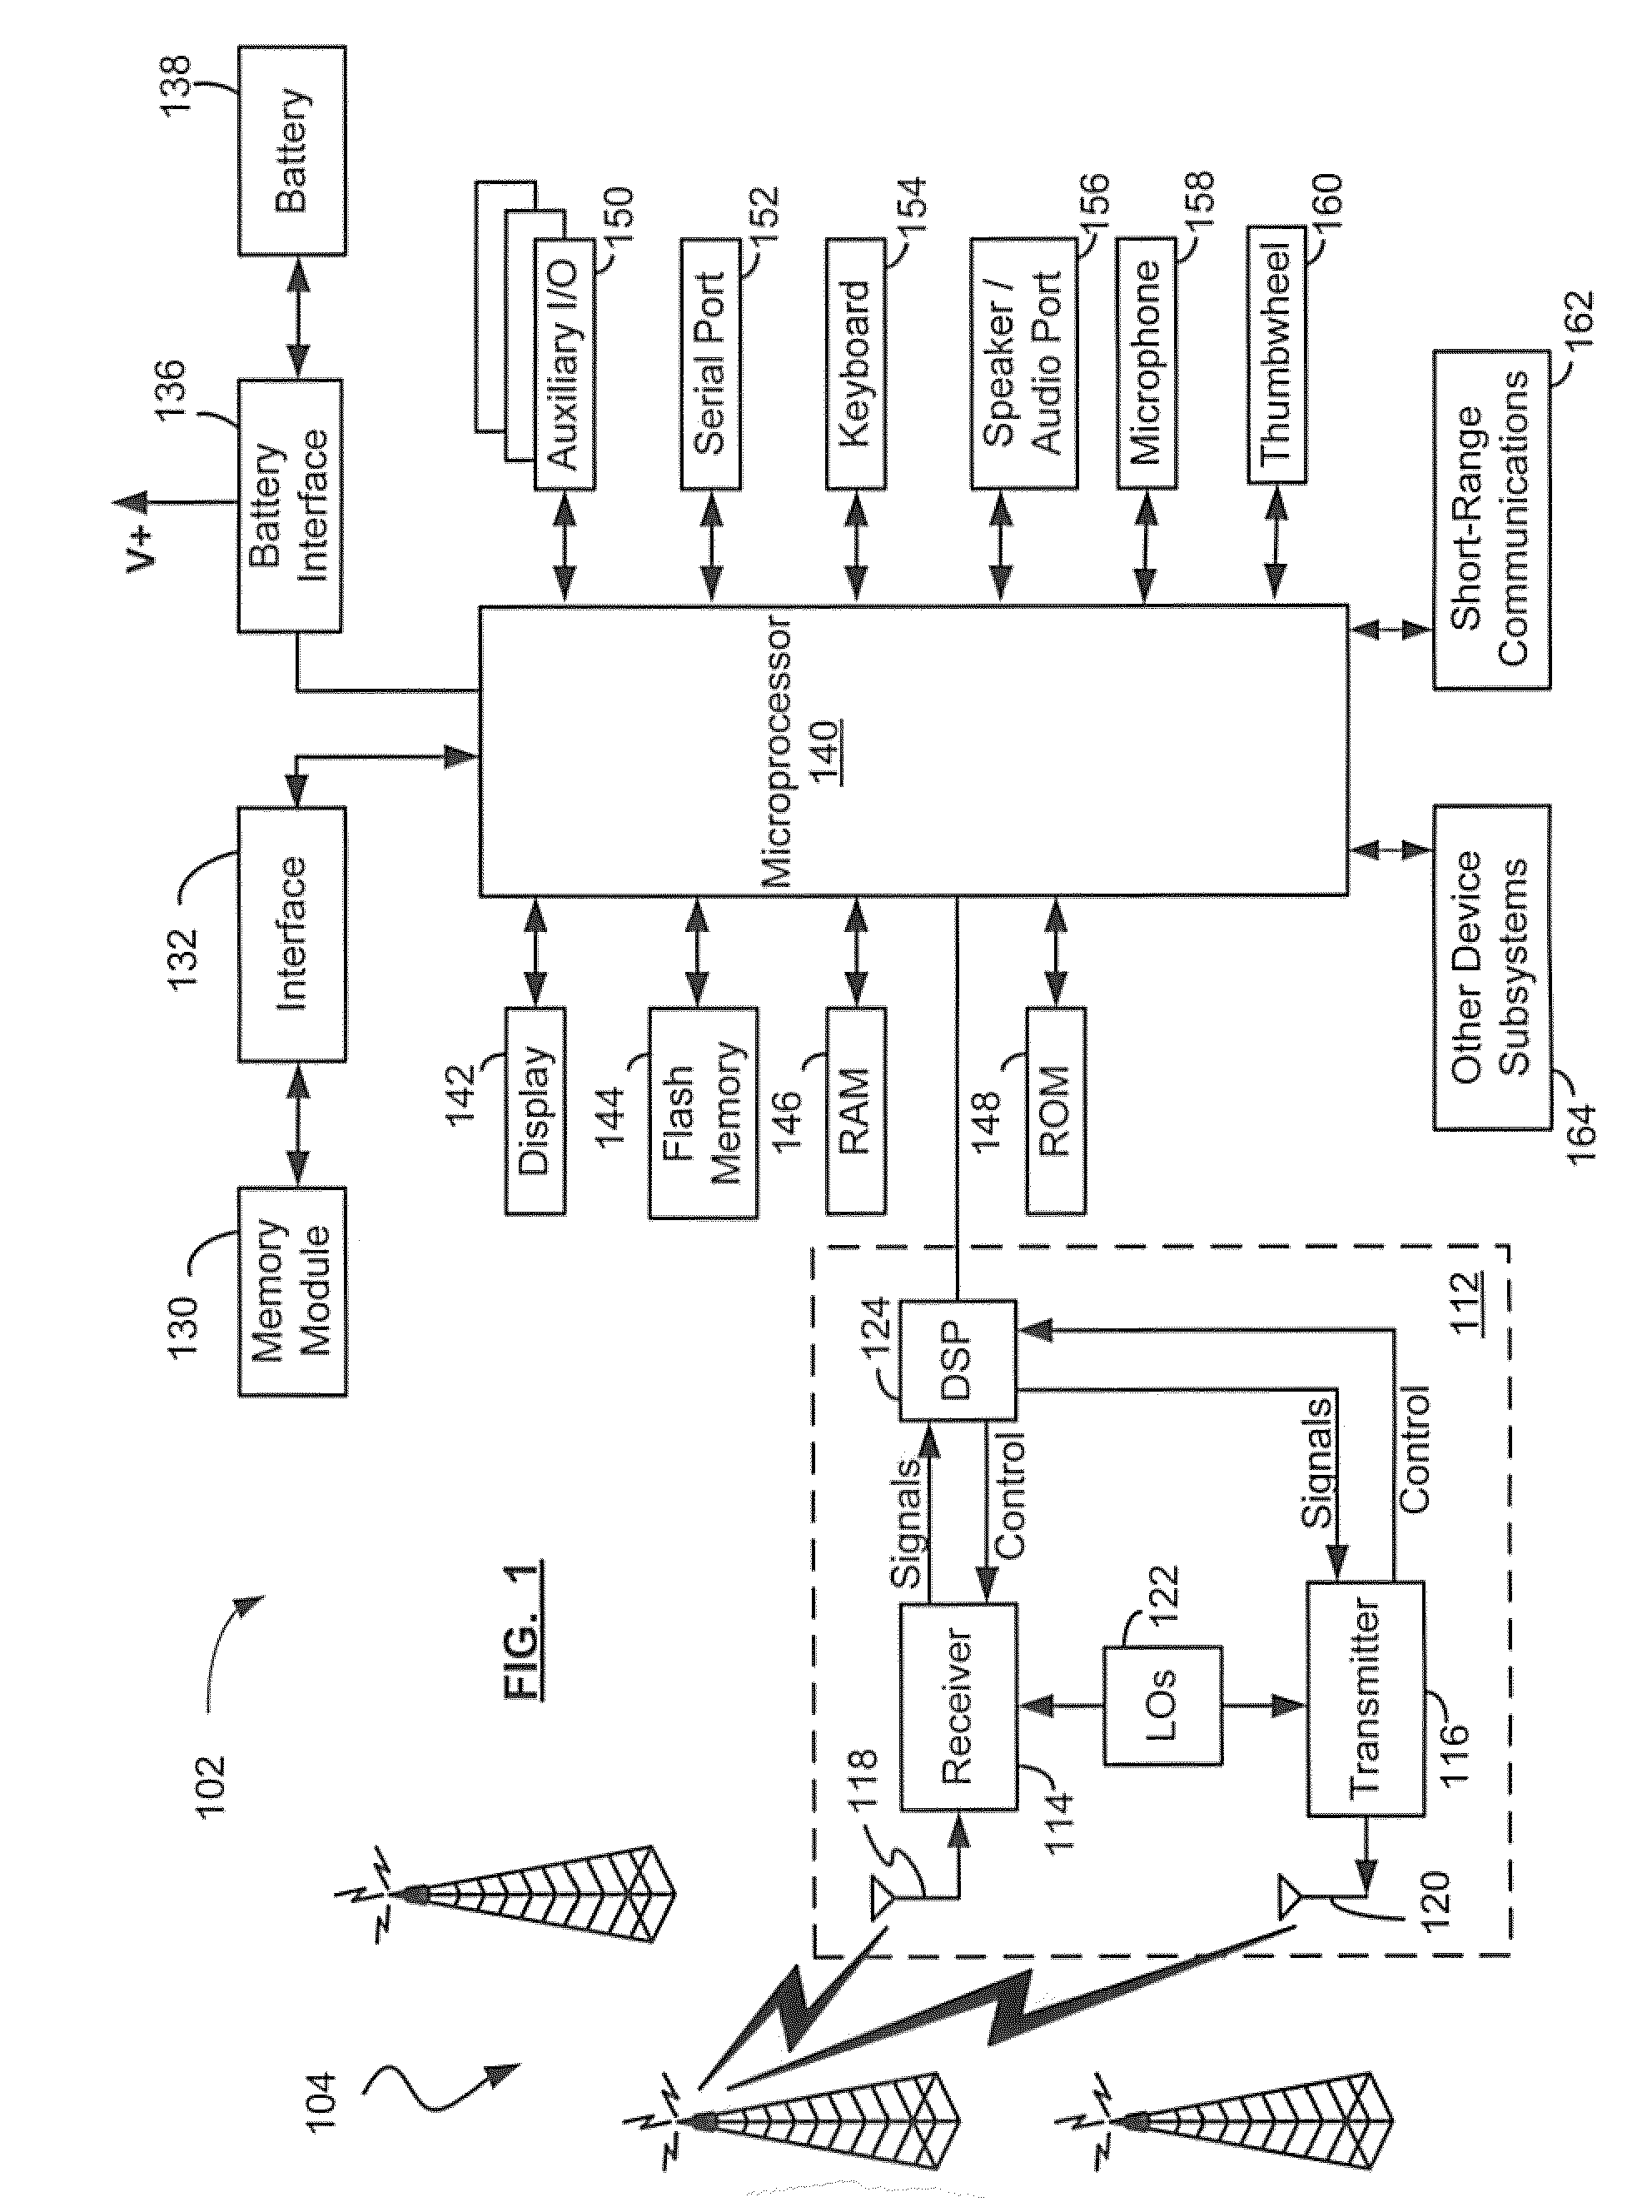 Method for enabling bandwidth management for mobile content delivery